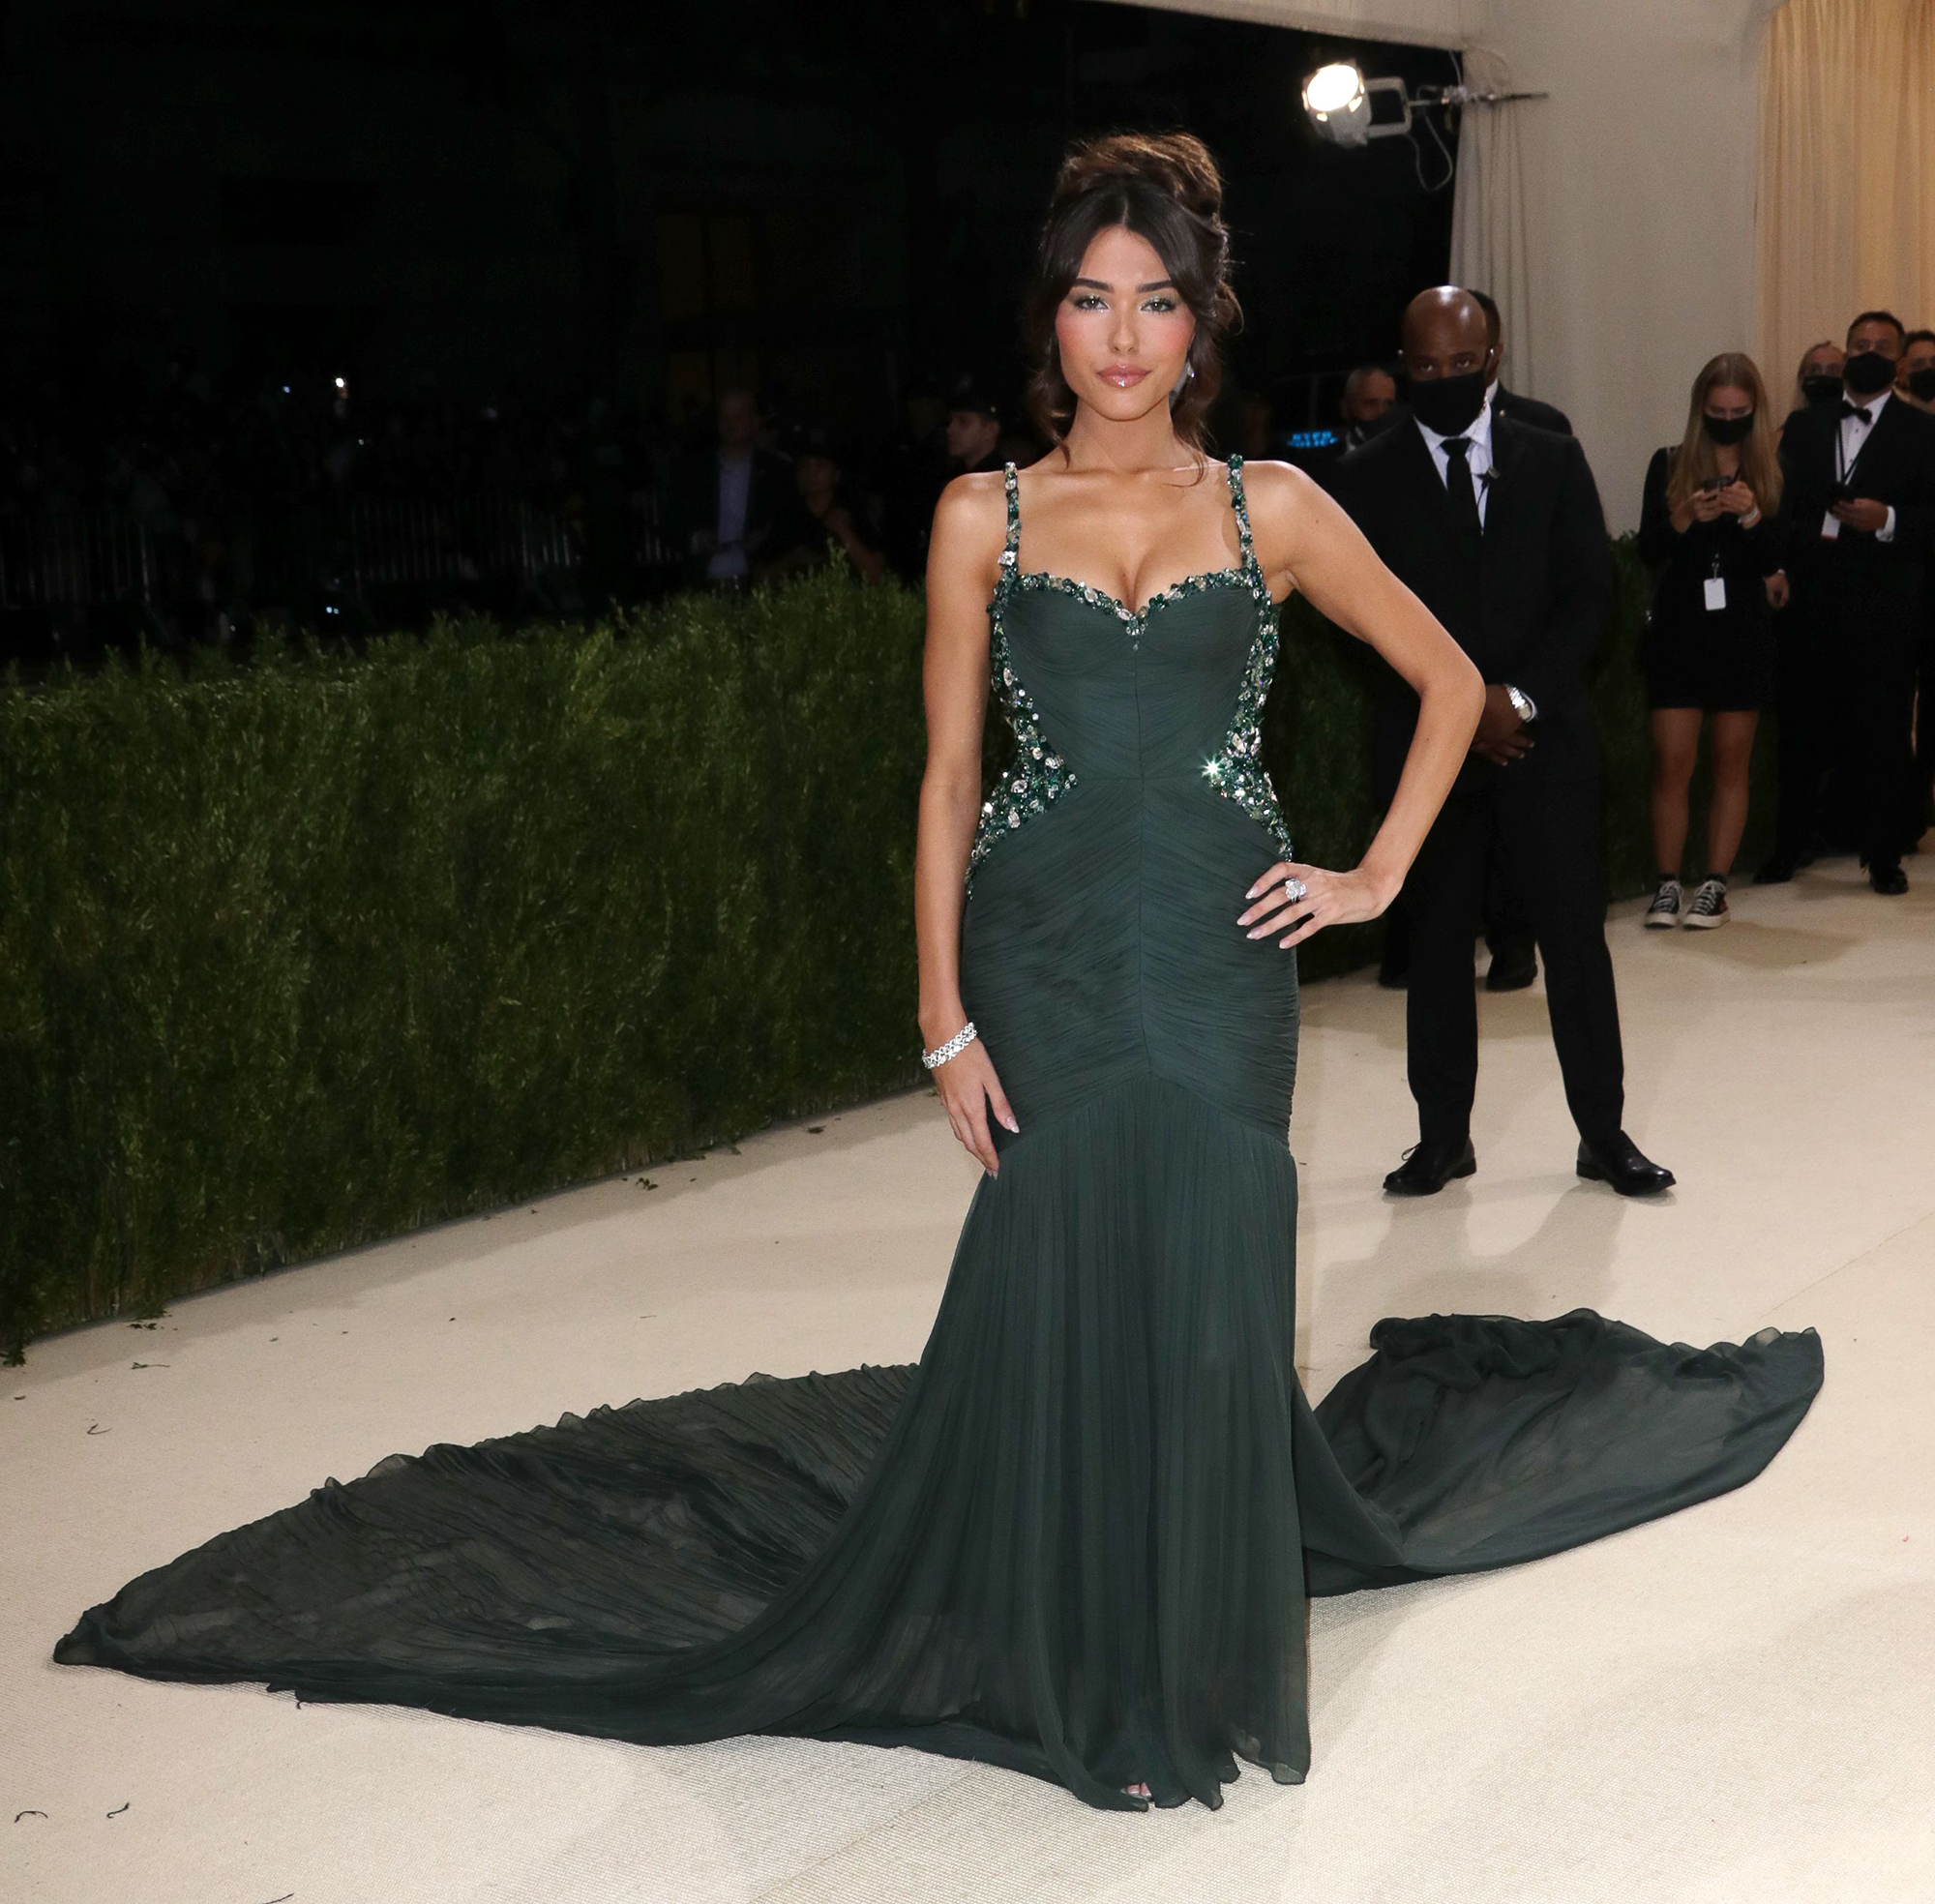 Influencers at the Met Gala 2021 — Social Media Stars on the Red